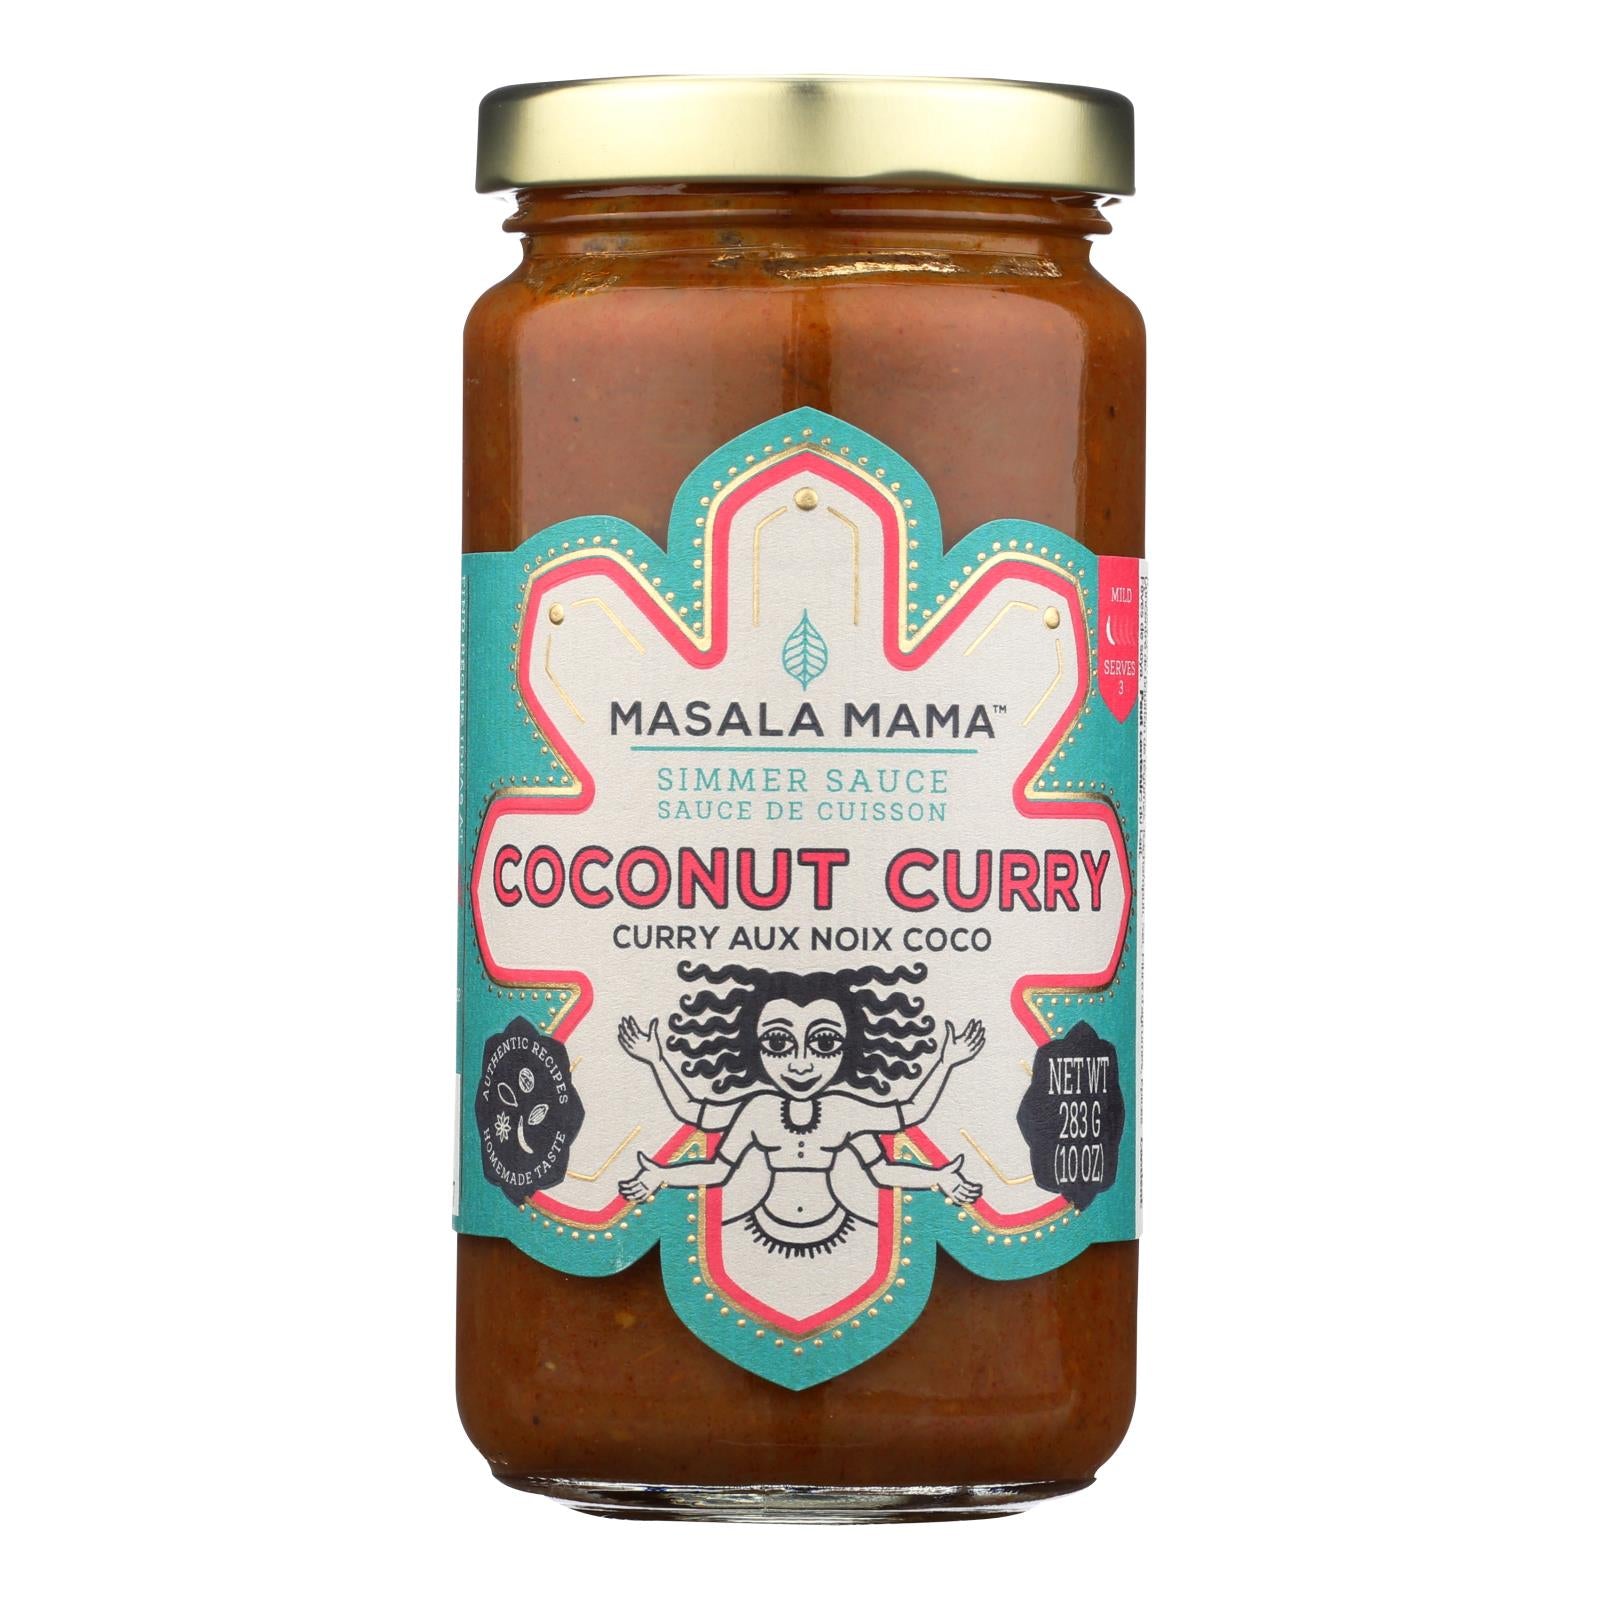 Masala Mama, Masala Mama Coconut Curry All Natural Simmer Sauce - Case of 6 - 10 OZ (Pack of 6)